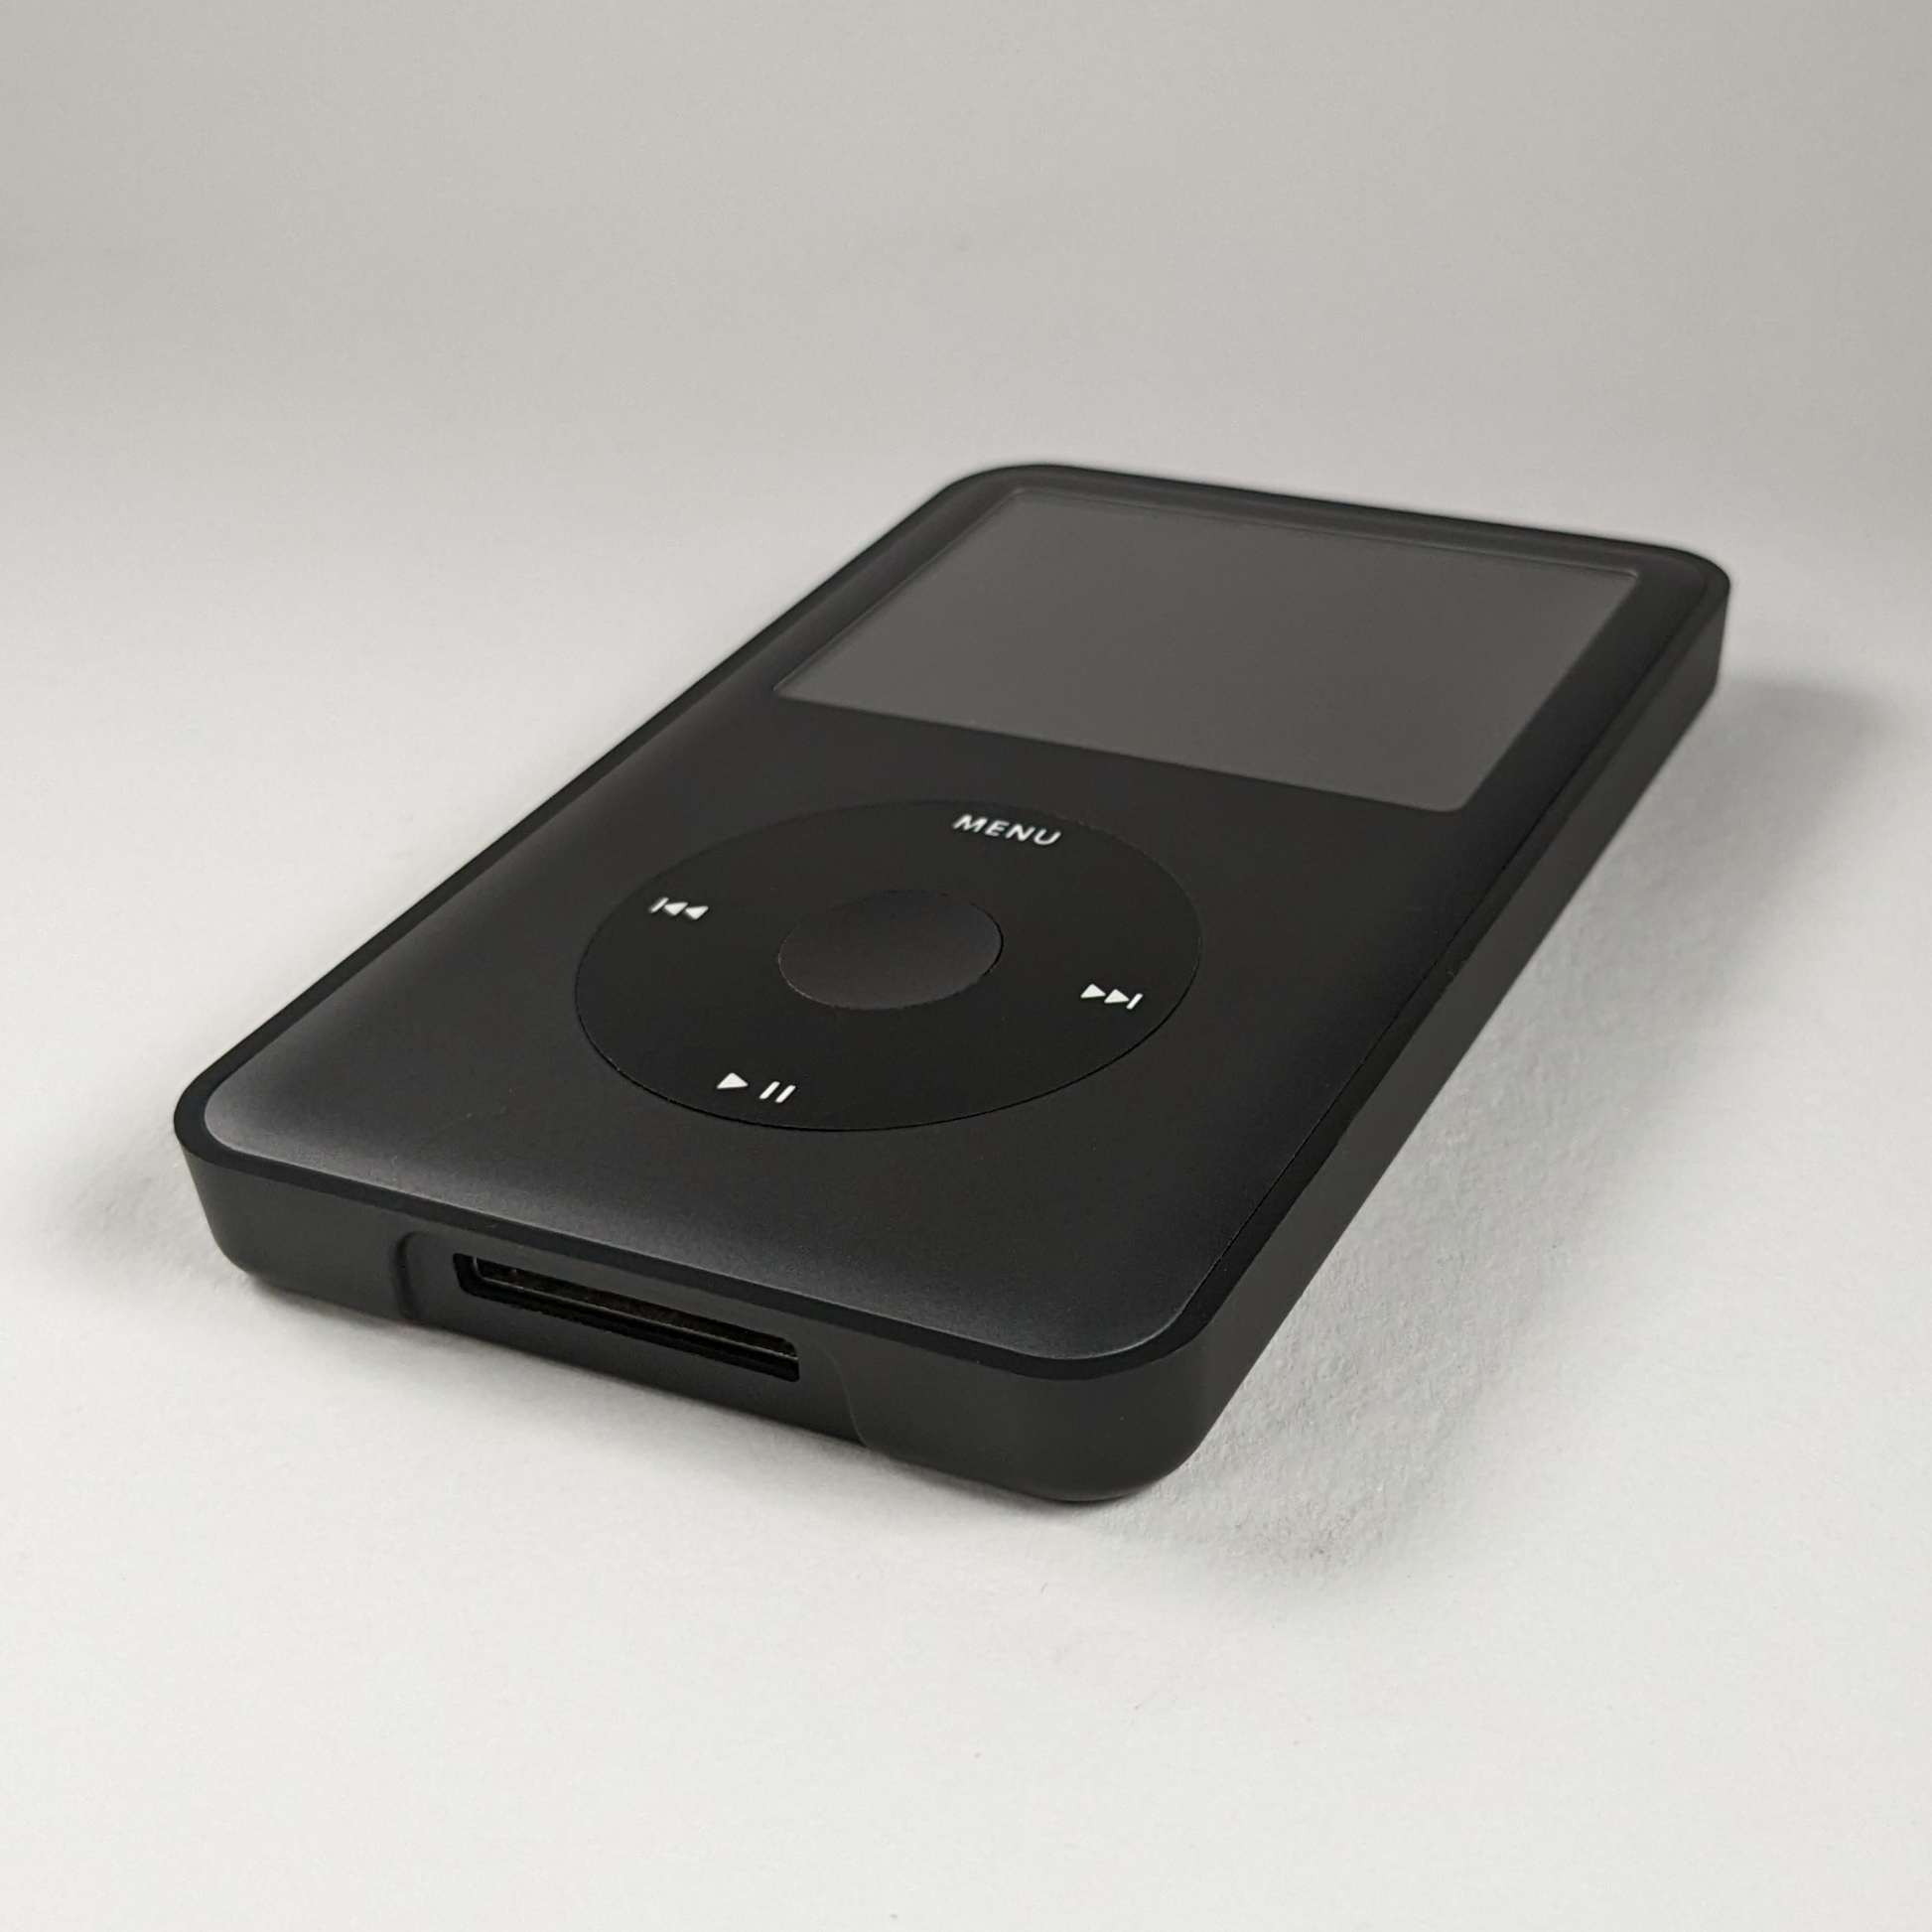 iPod Classic with Classic Connect pre-installed –